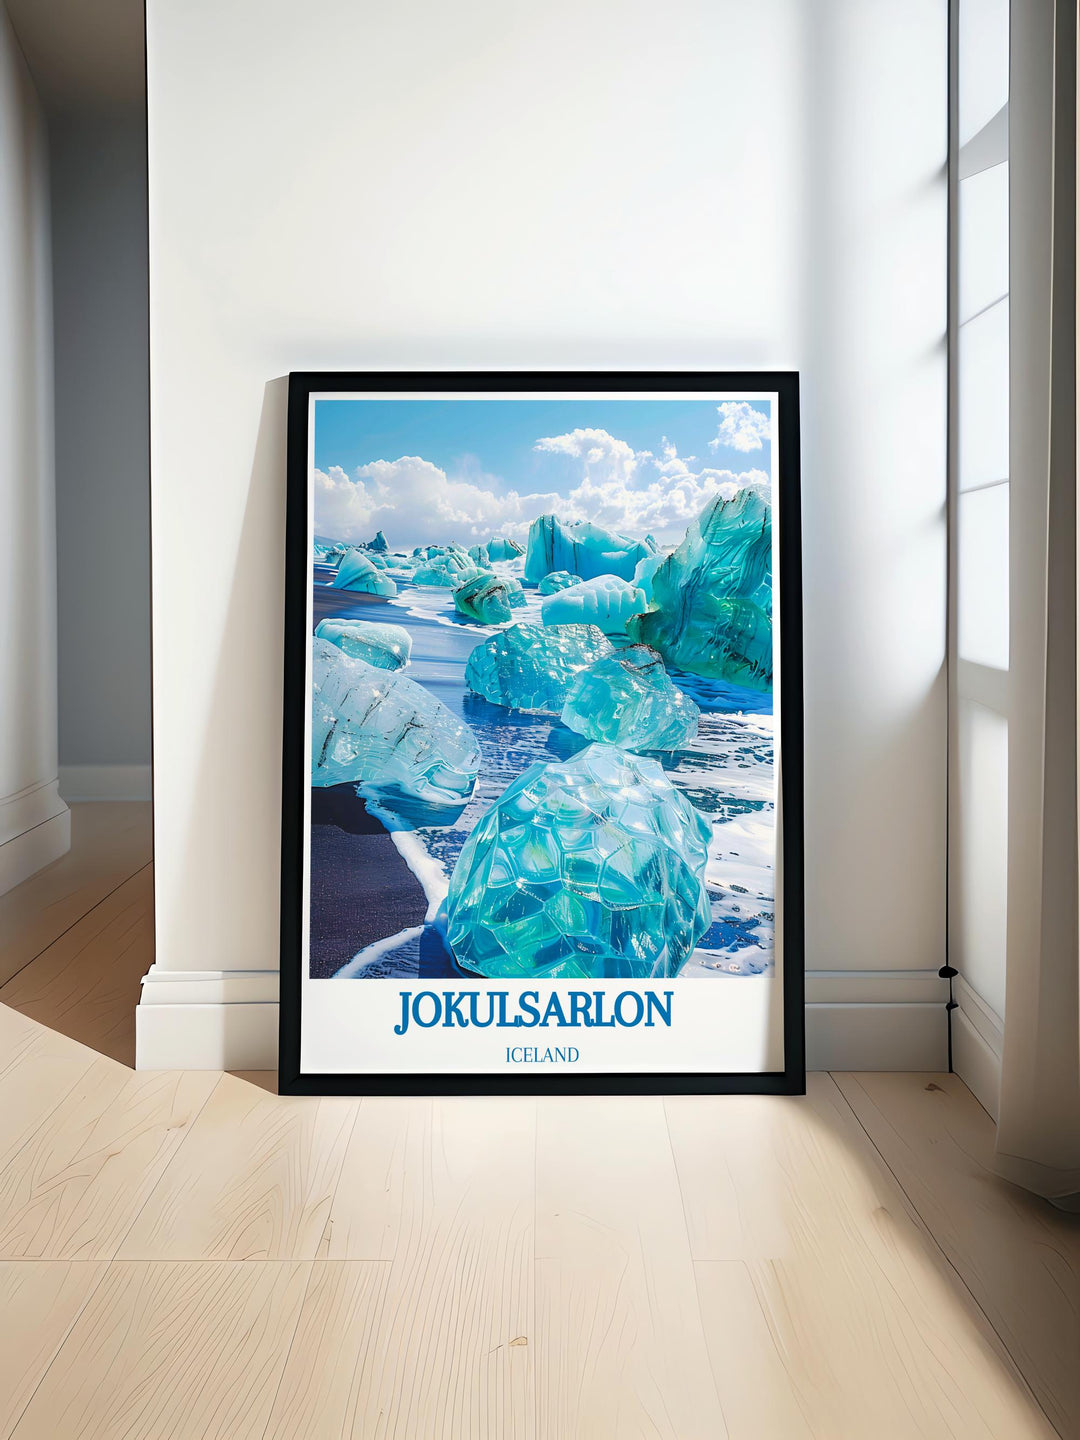 Art print of Jokulsarlon lagoon showcasing serene blue waters and floating icebergs perfect for a calming home atmosphere